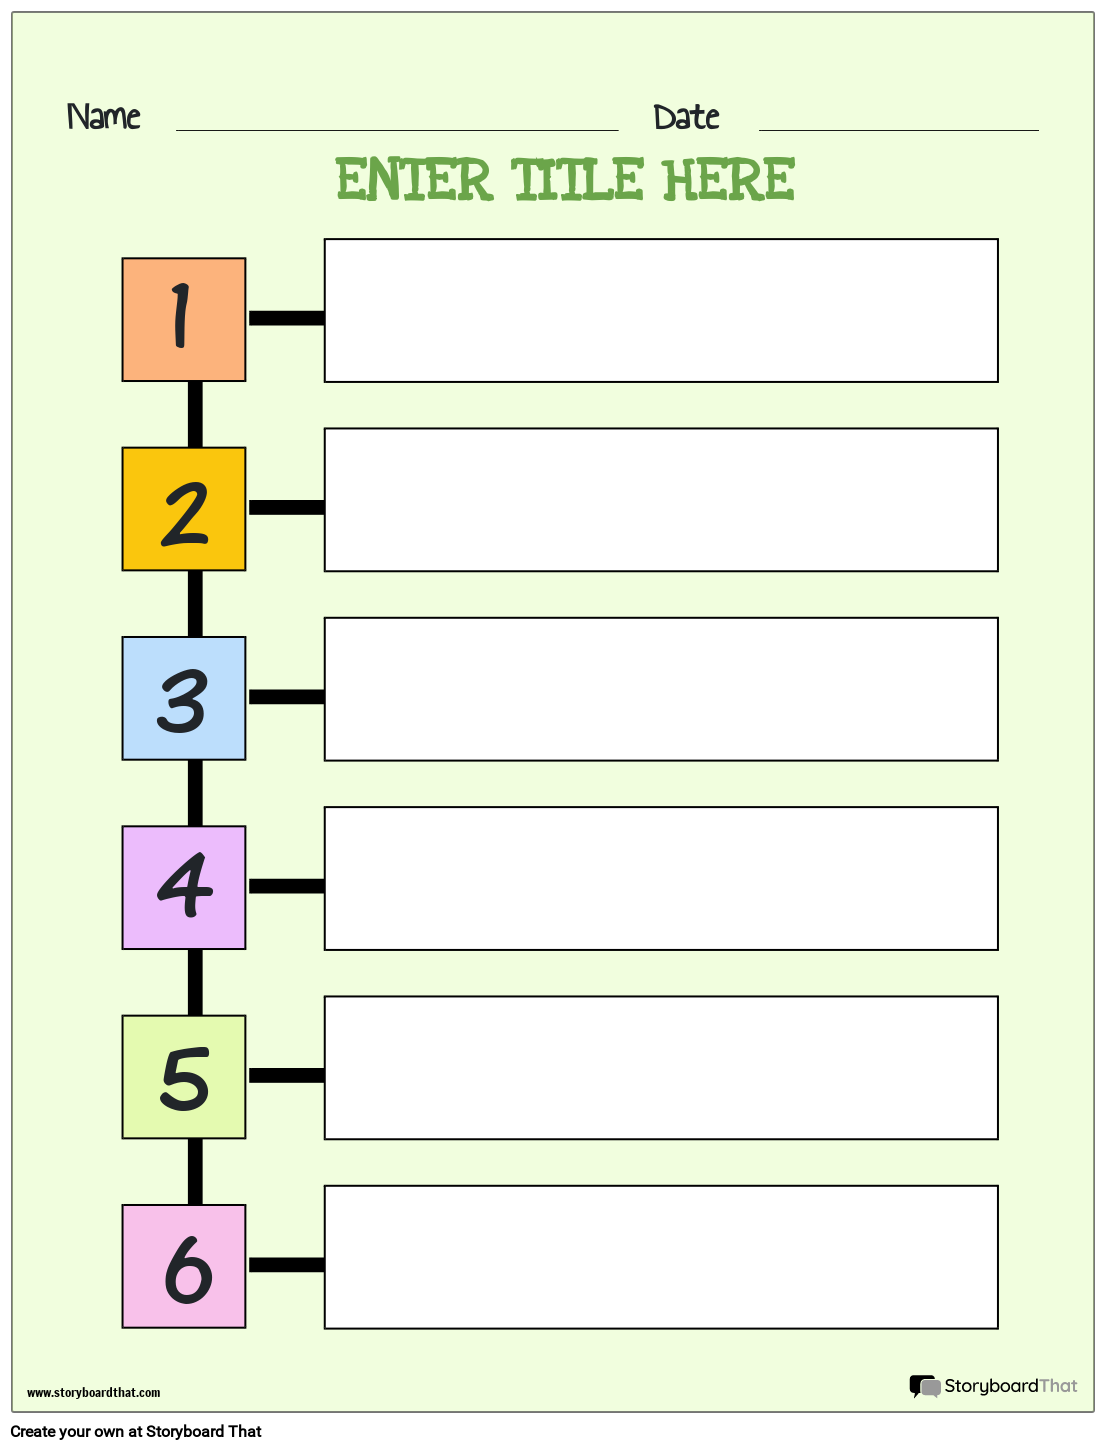 Colorful Customizable Tier List Worksheet with Numbers